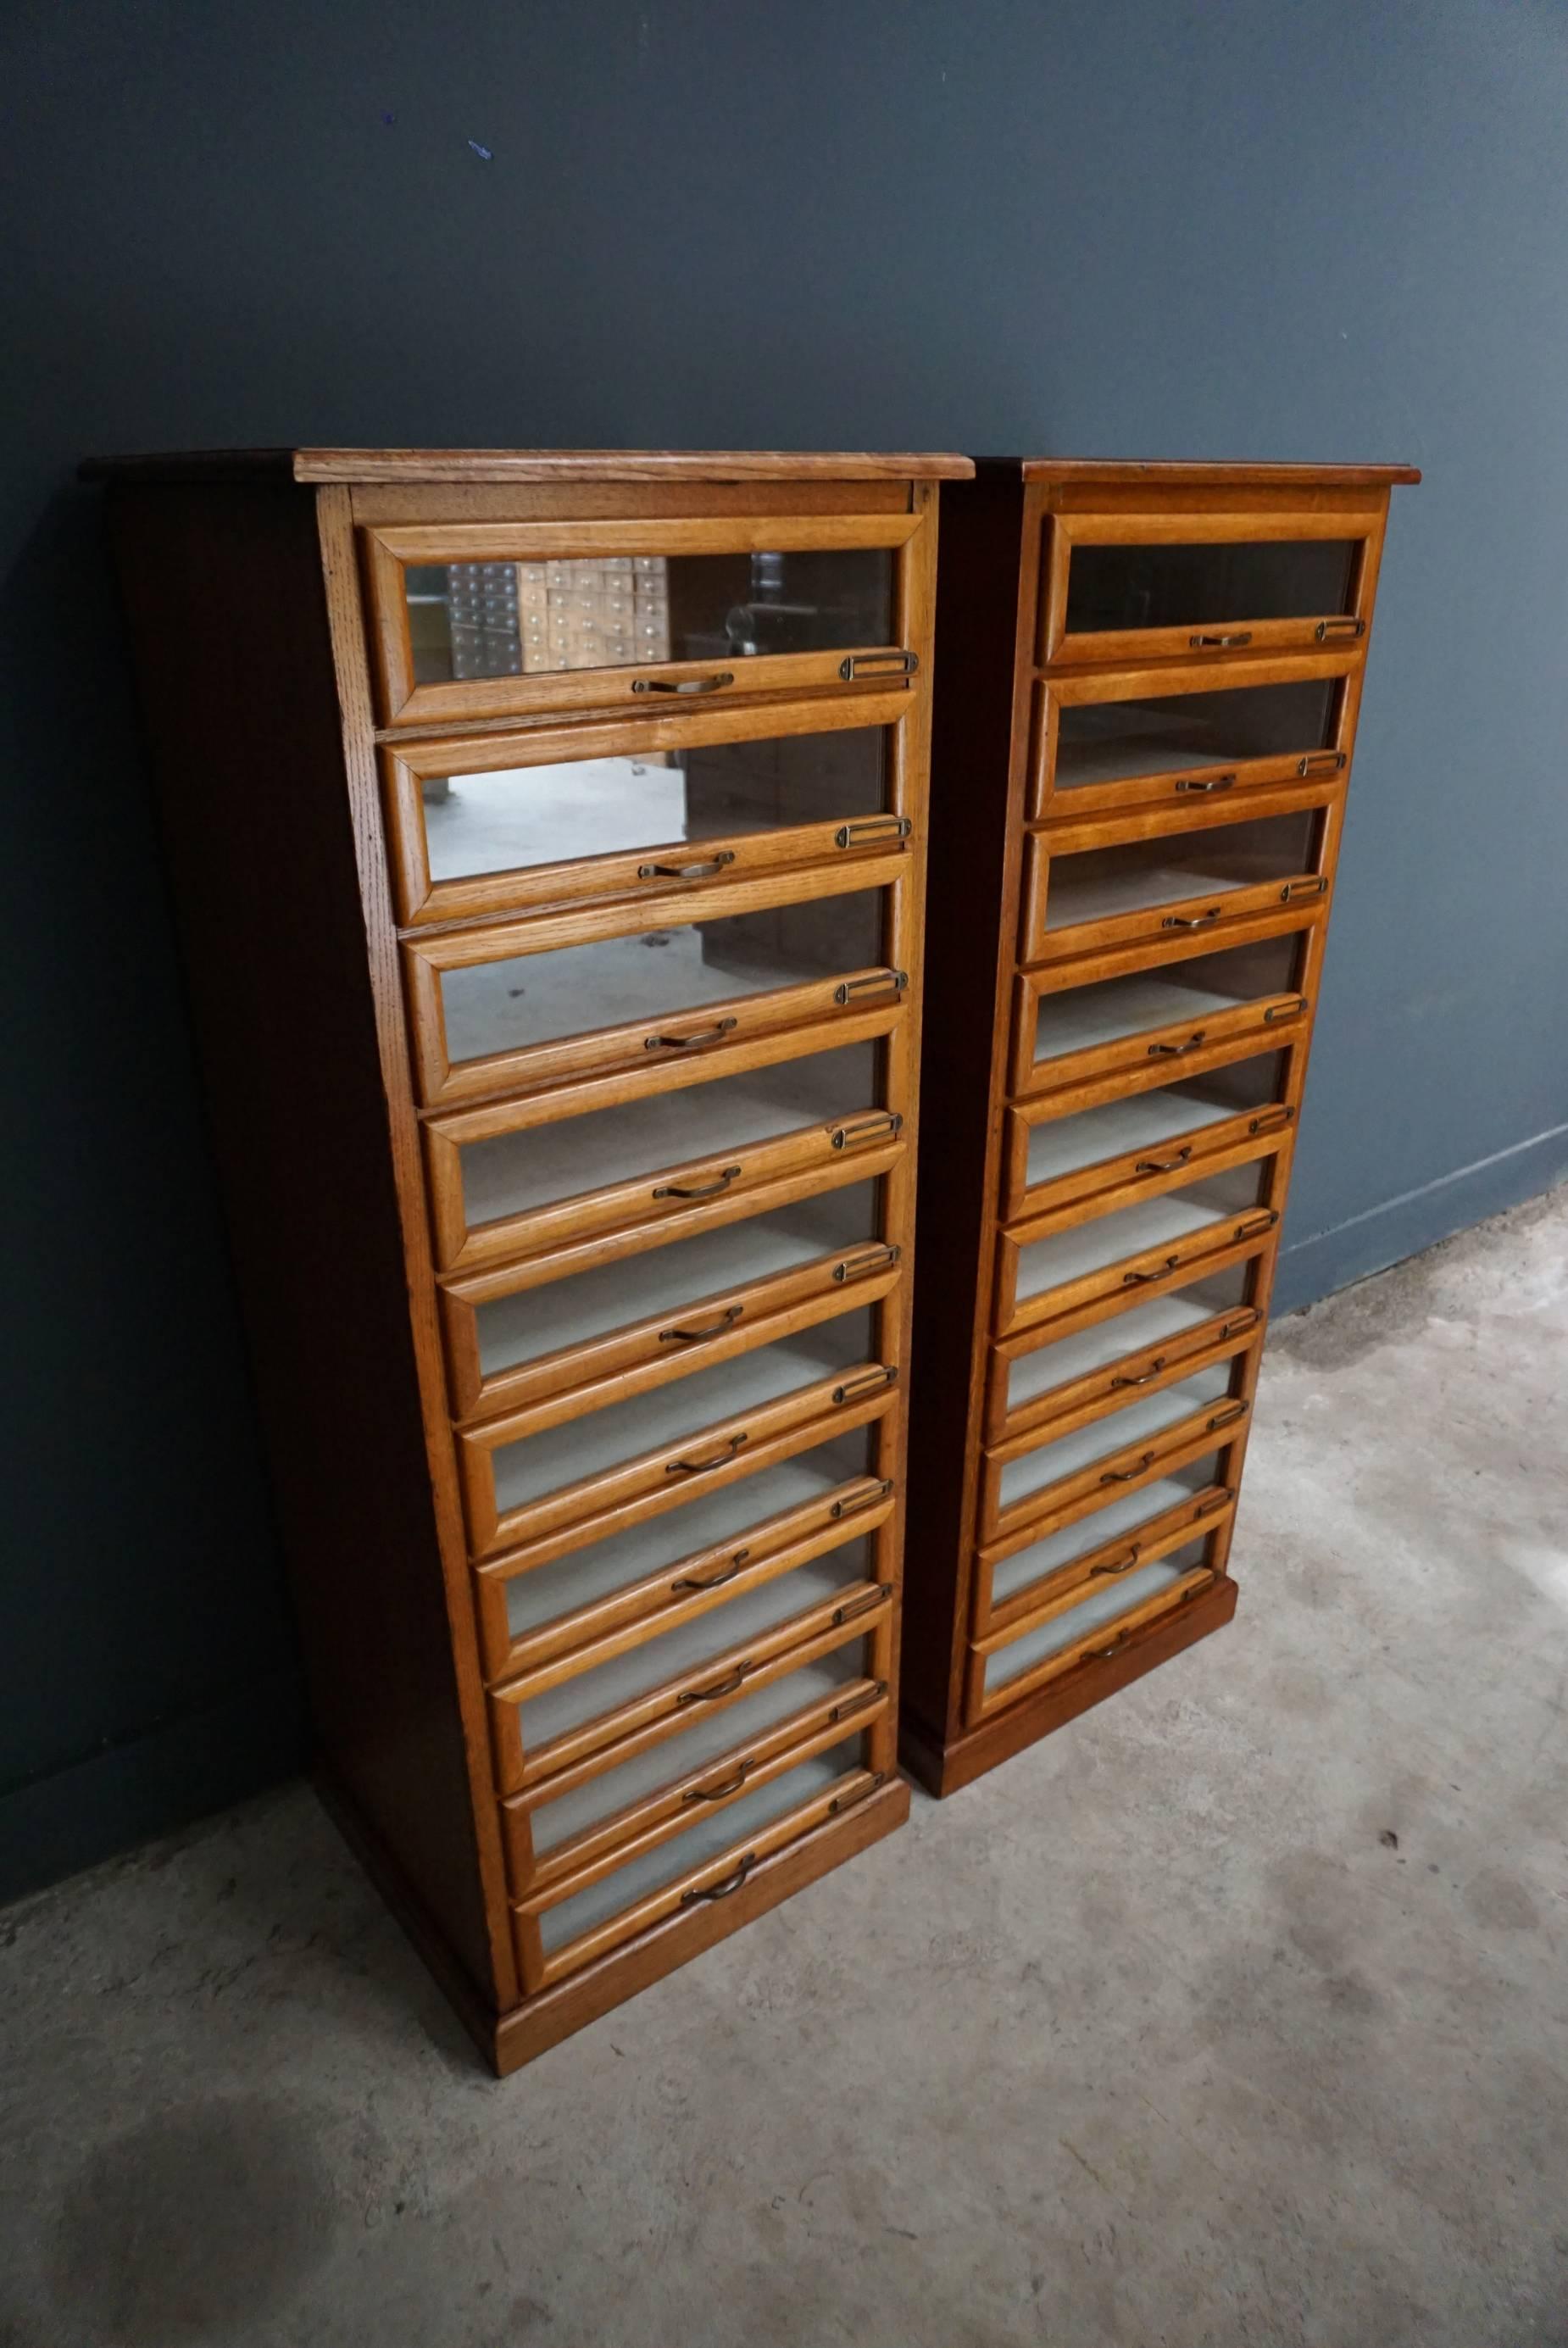 This vintage haberdashery shop cabinet originates from the United Kingdom. It is made from oak and features 10 drawers. It is restored and the drawers open and shut smoothly. The inside of the drawers measure 42.2 x 45 x 11 cm